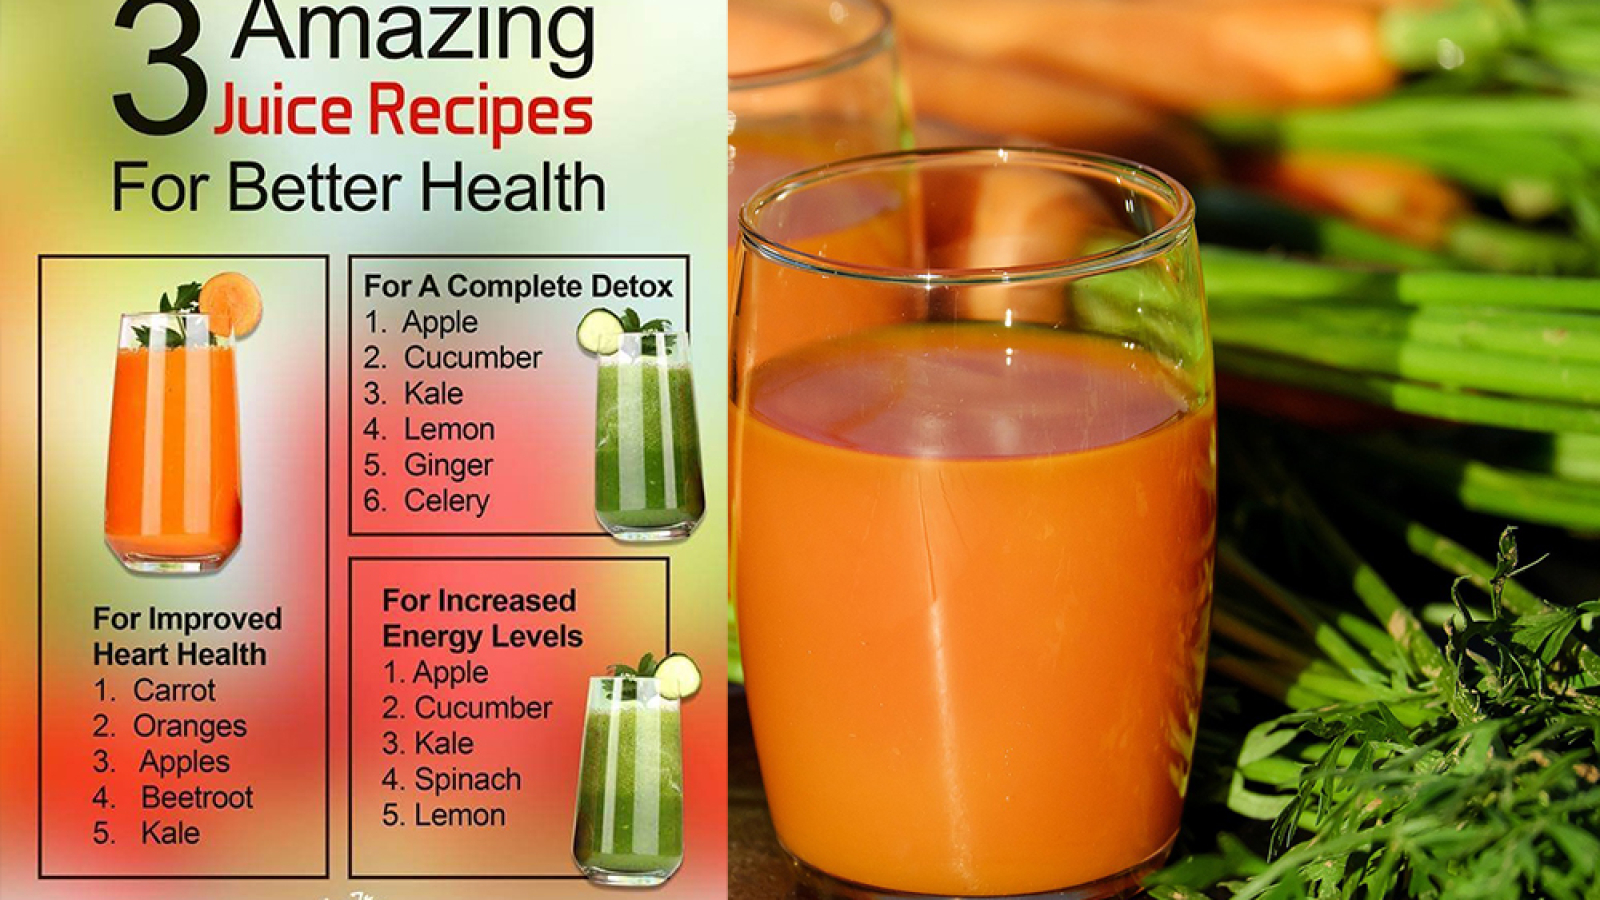 3-Amazing-Juice-Recipes-for-Better-Health-blog